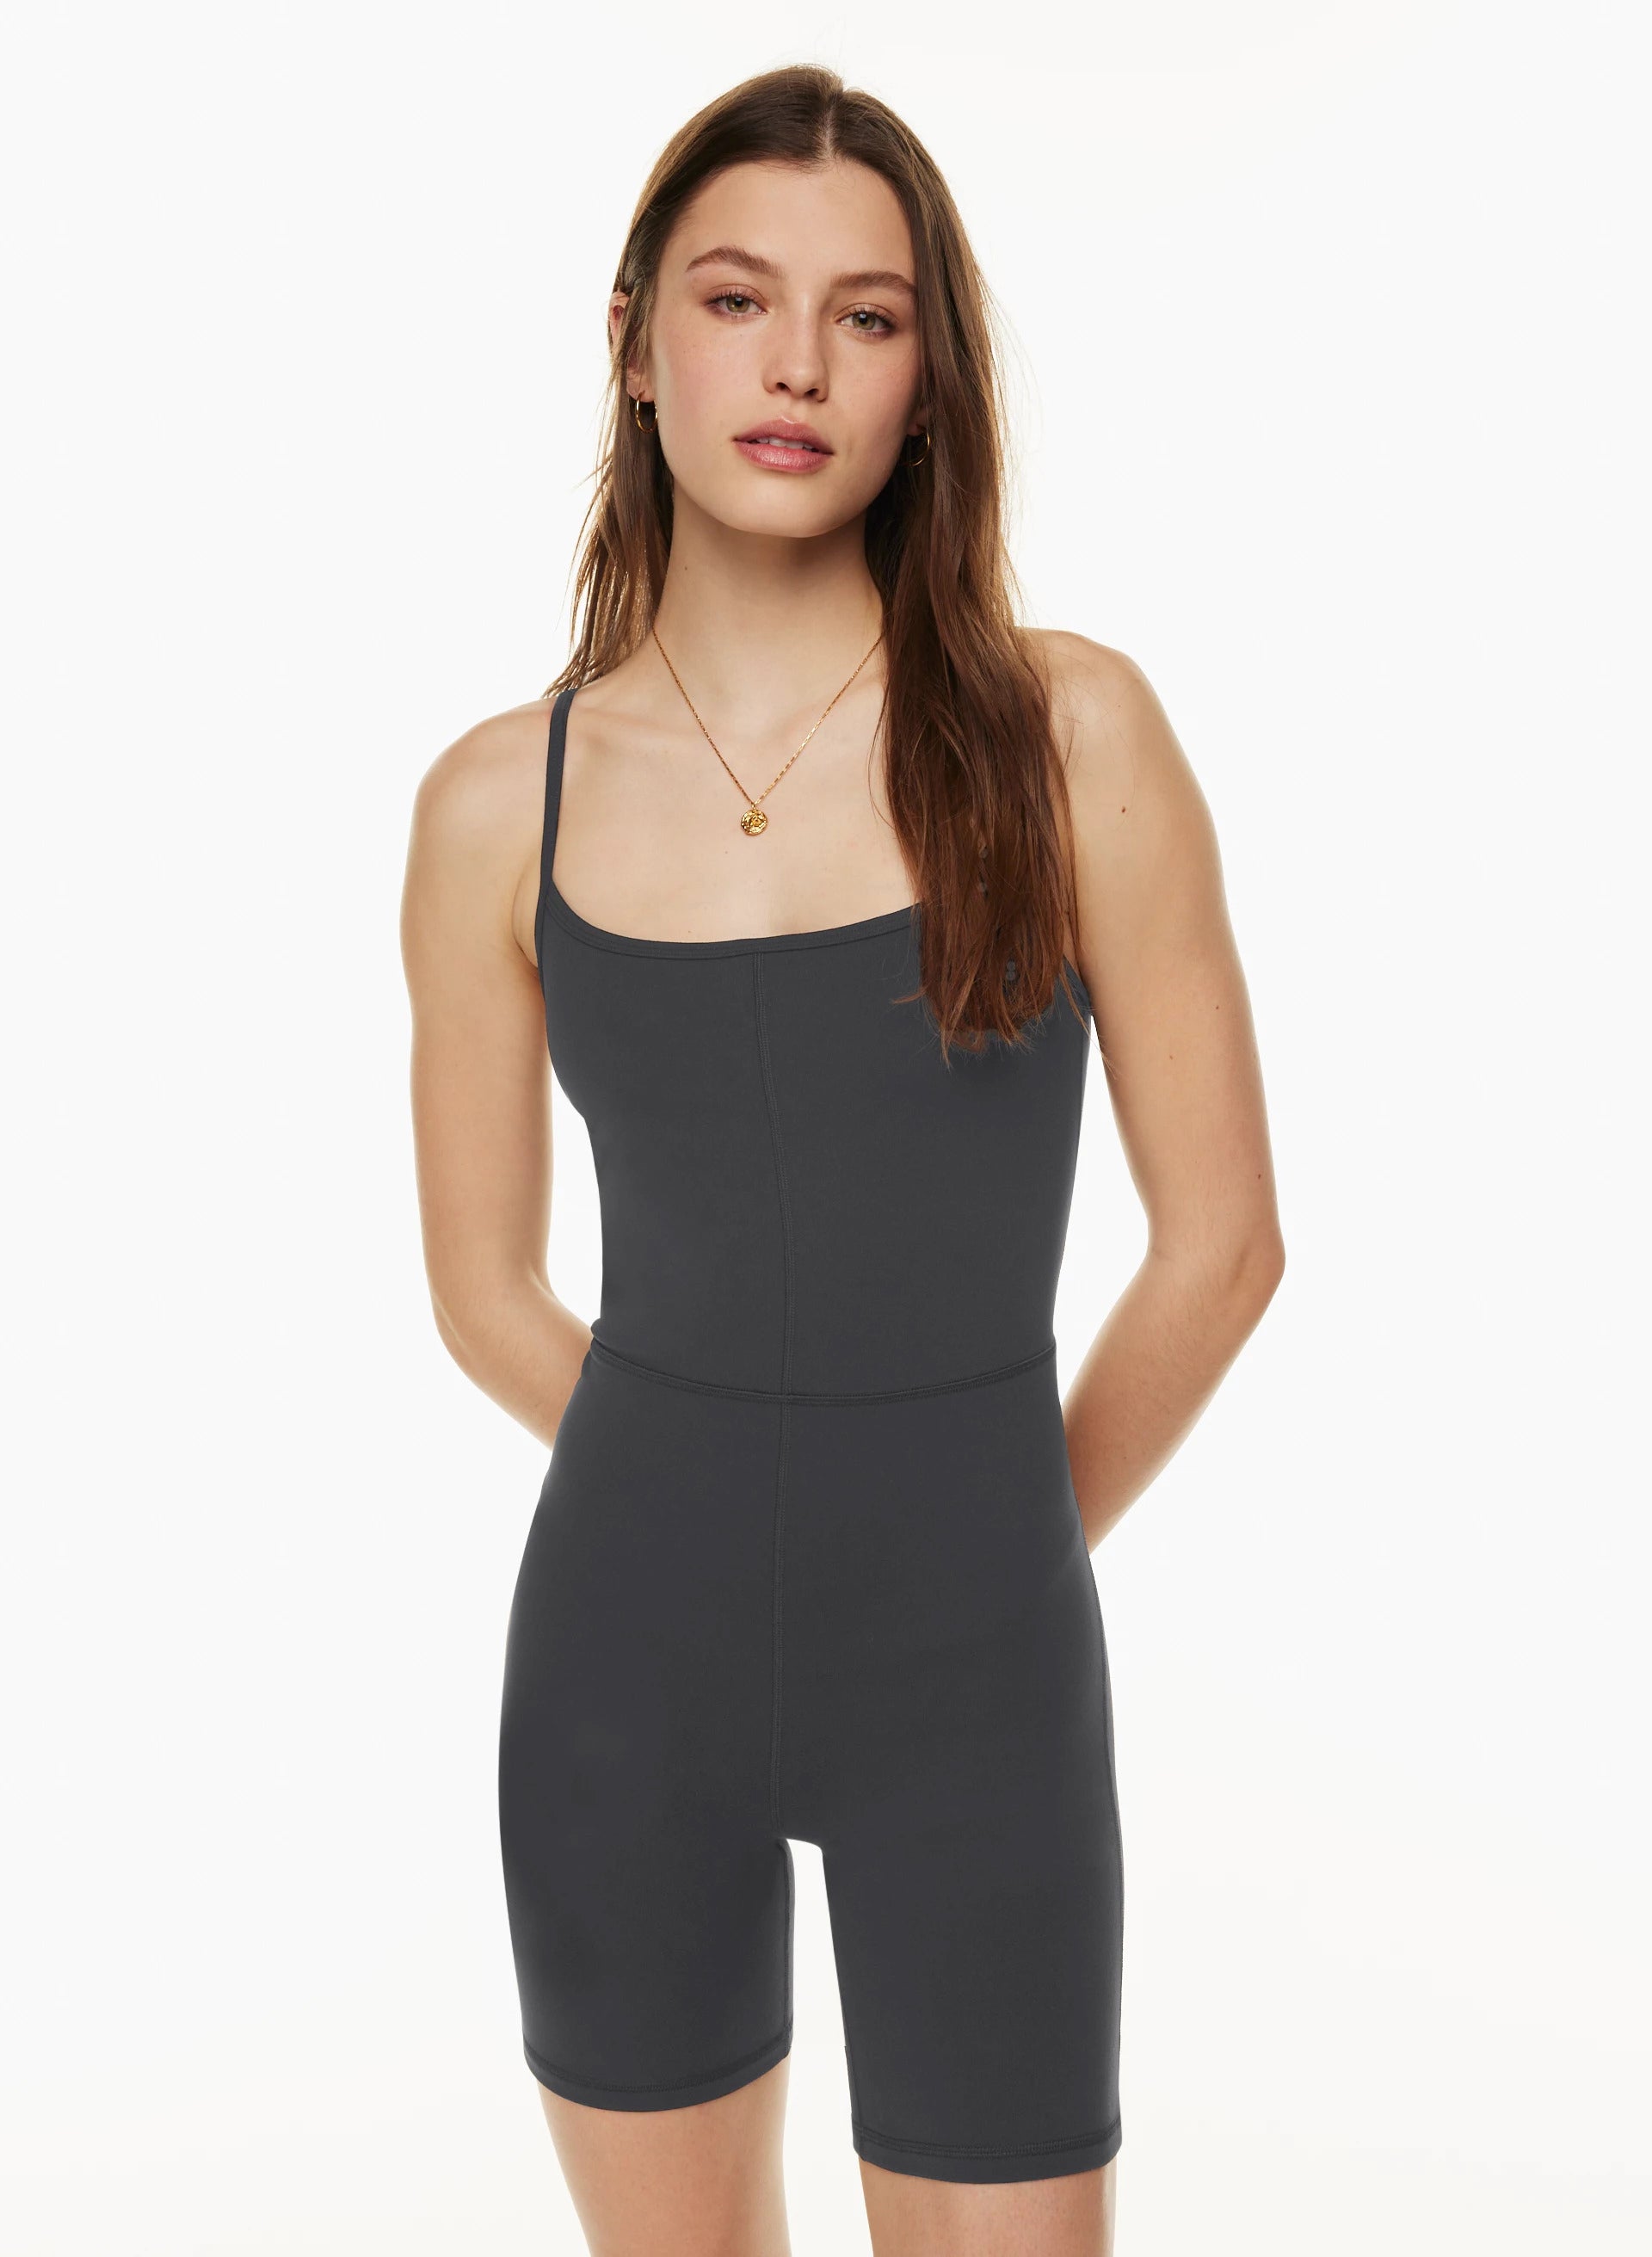 This is your sign to get the divinity jumpsuit from Aritzia, I got